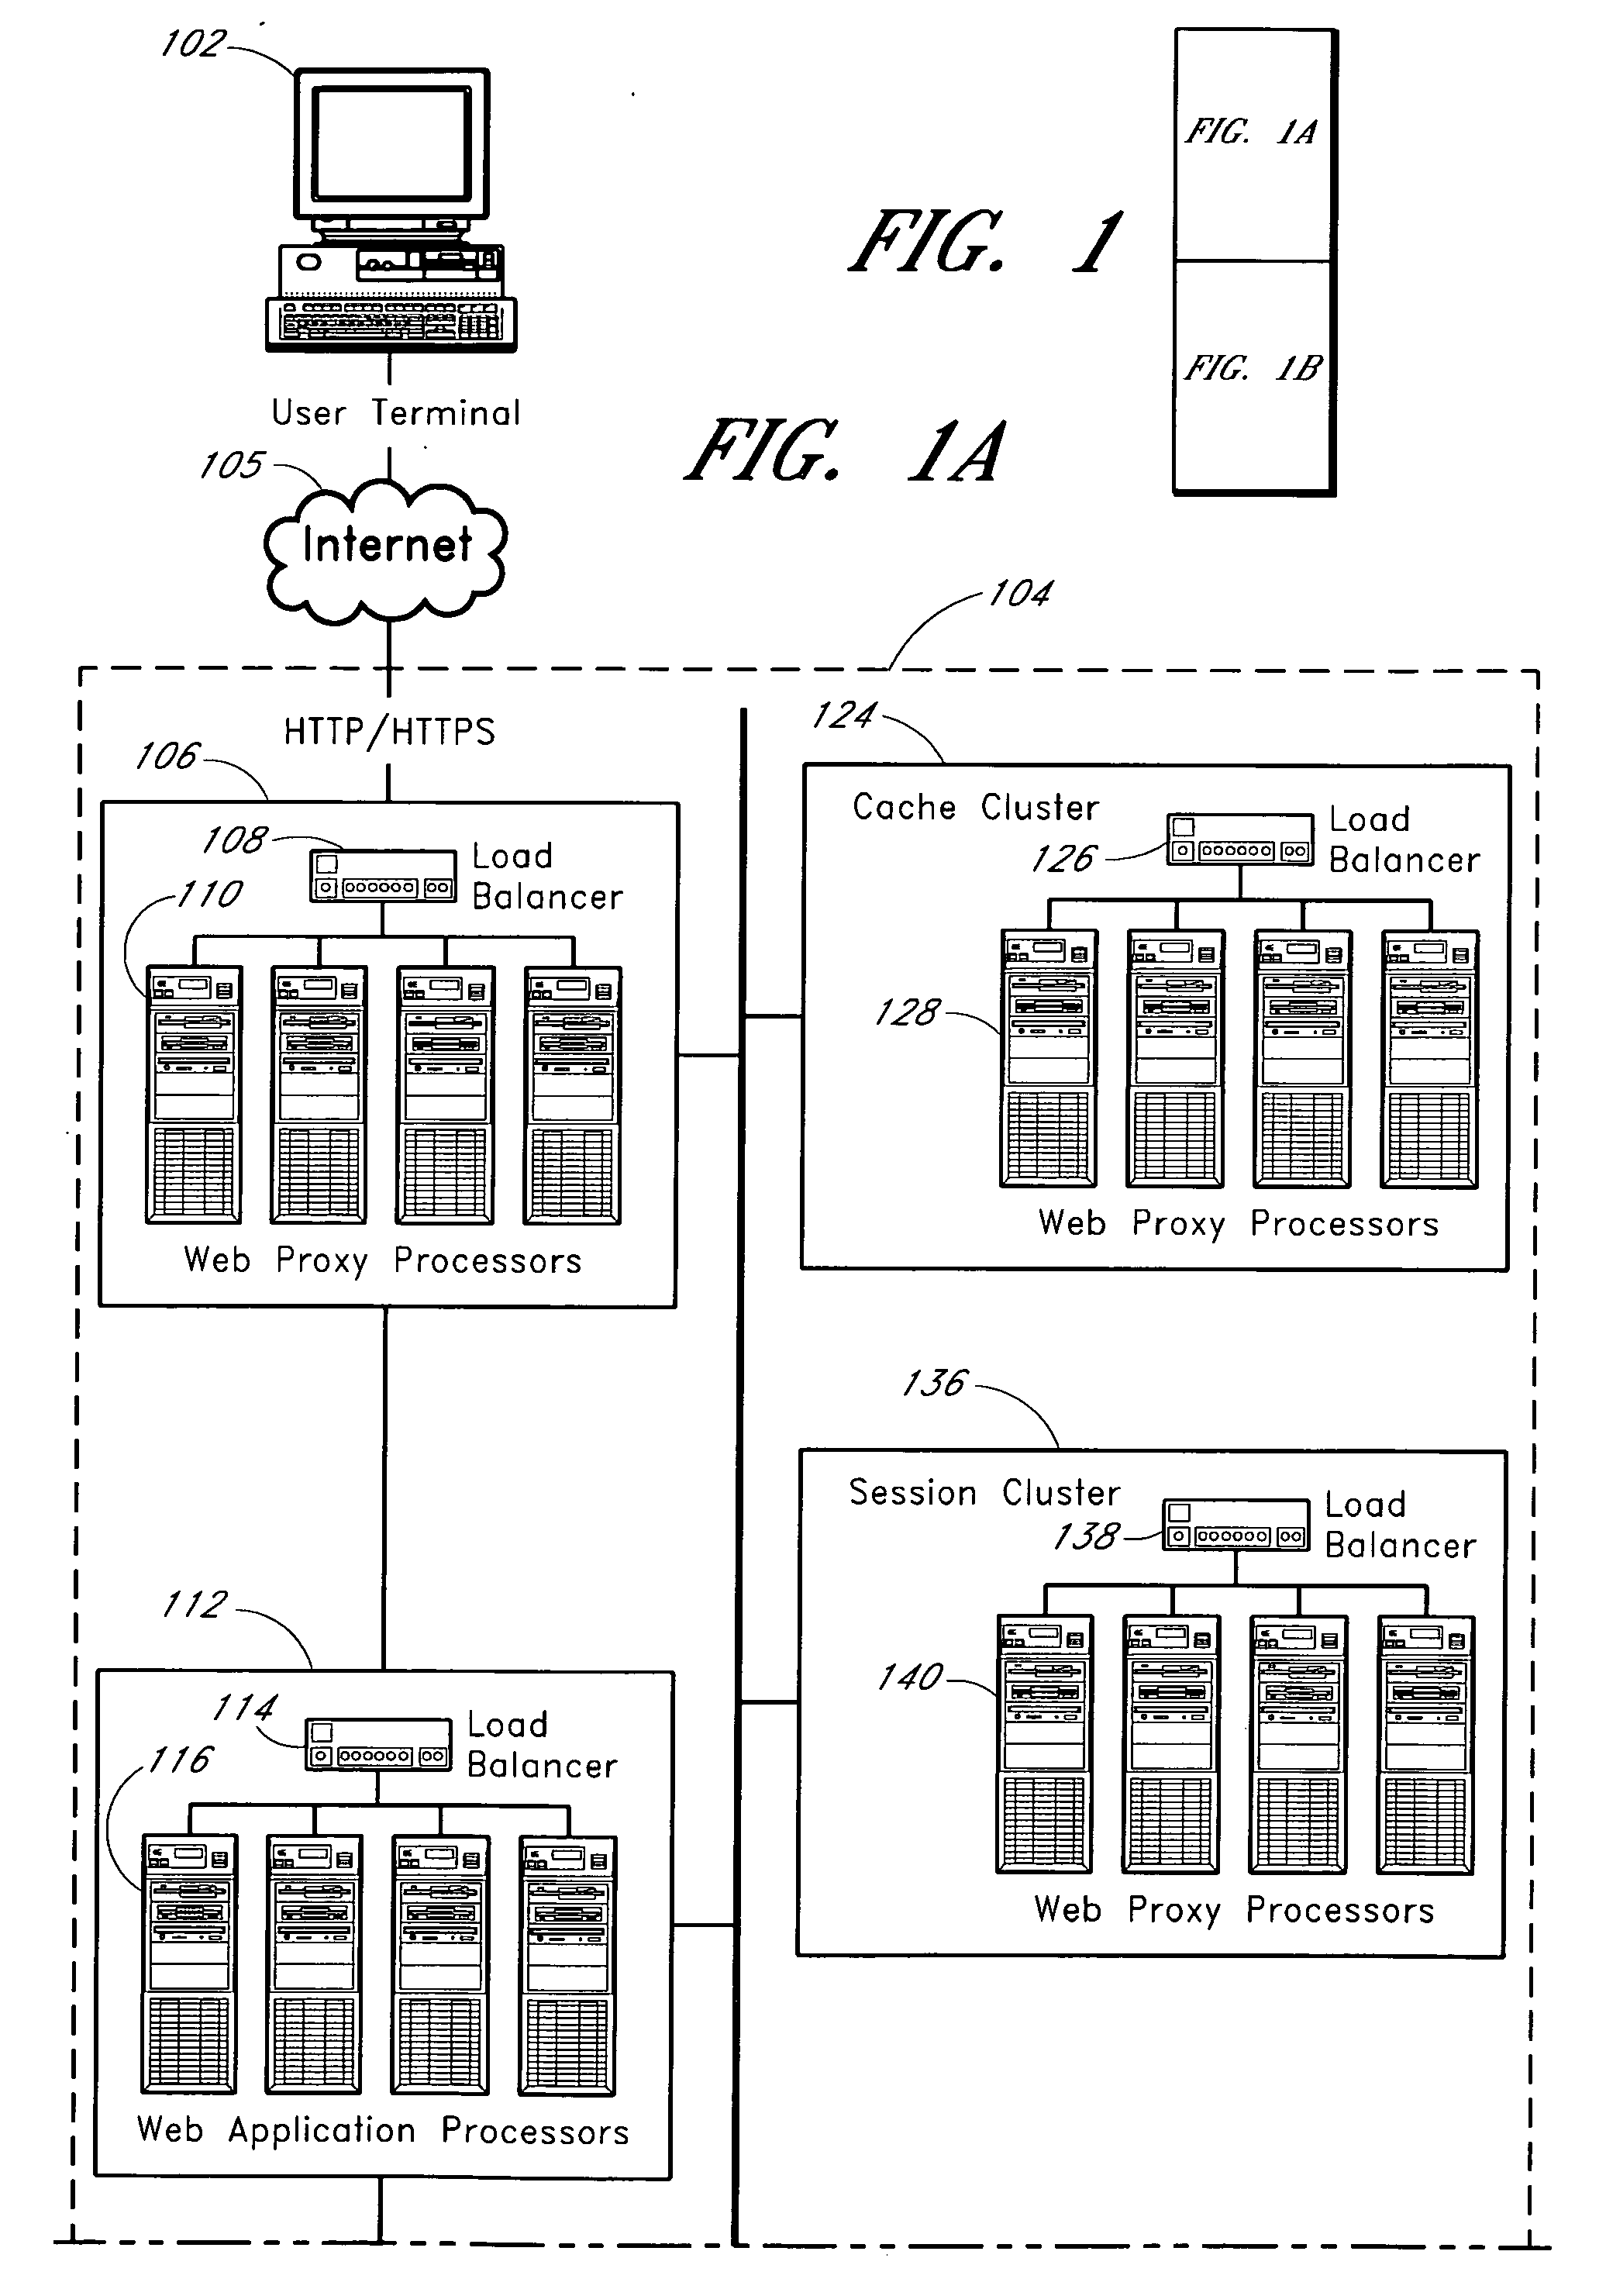 Apparatus and methods for providing queue messaging over a network